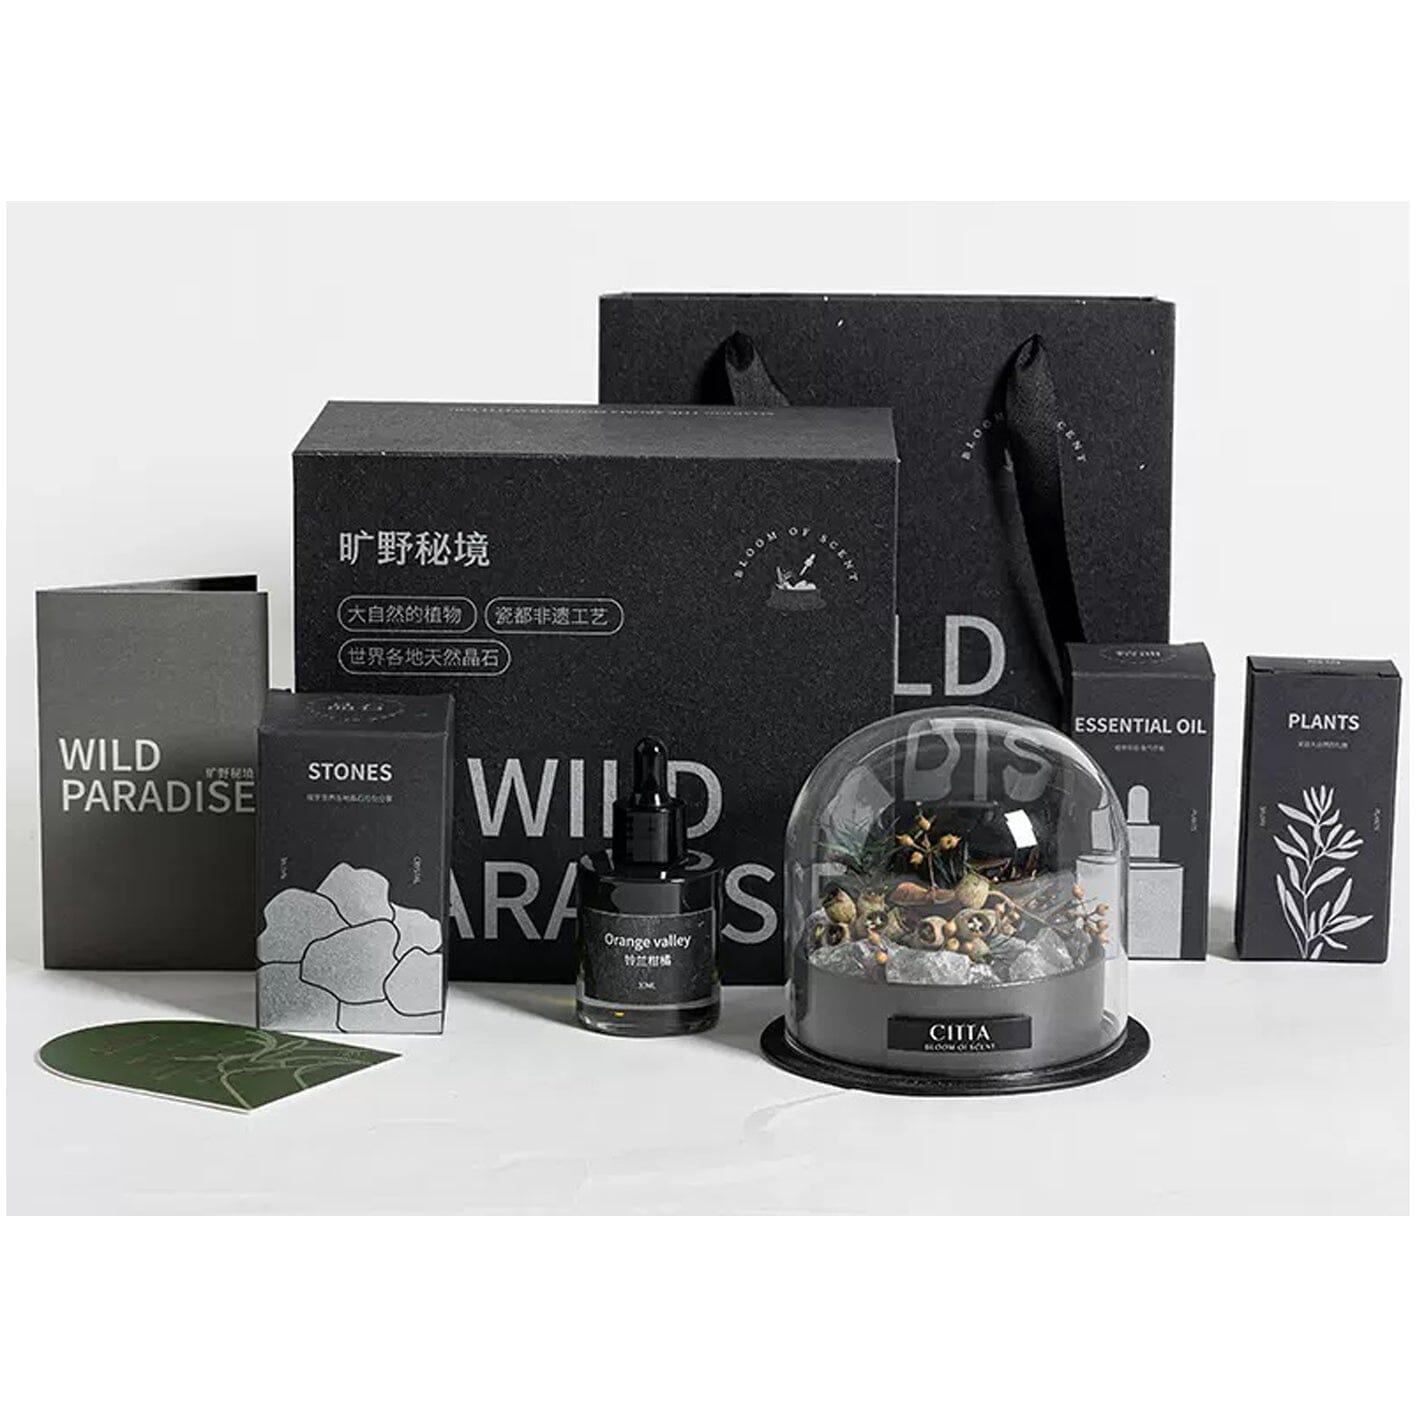 CITTA Wild Paradise Crystal Stone Diffuser Aromatherapy Gift Set with Dried Plants and High Purity Premium Essential Oil CITTA Tea-Coloured 